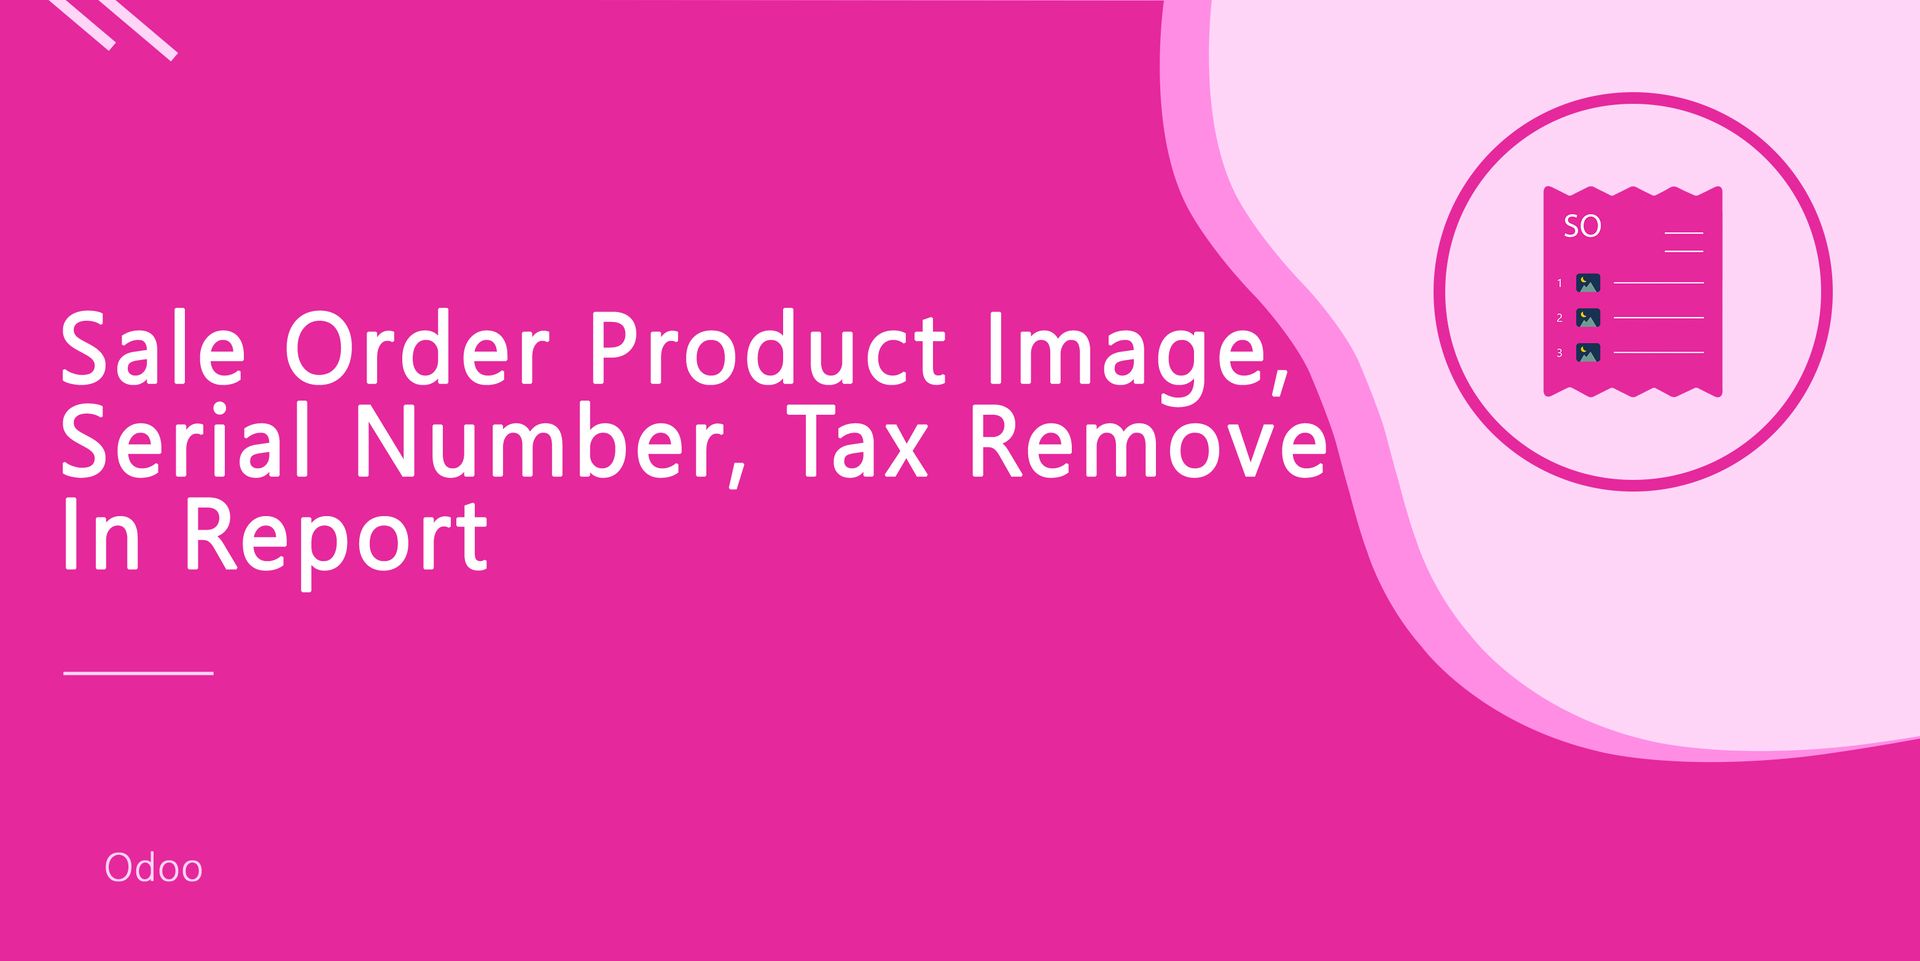 Sale Order Product Image, Serial Number, Tax Remove In Report